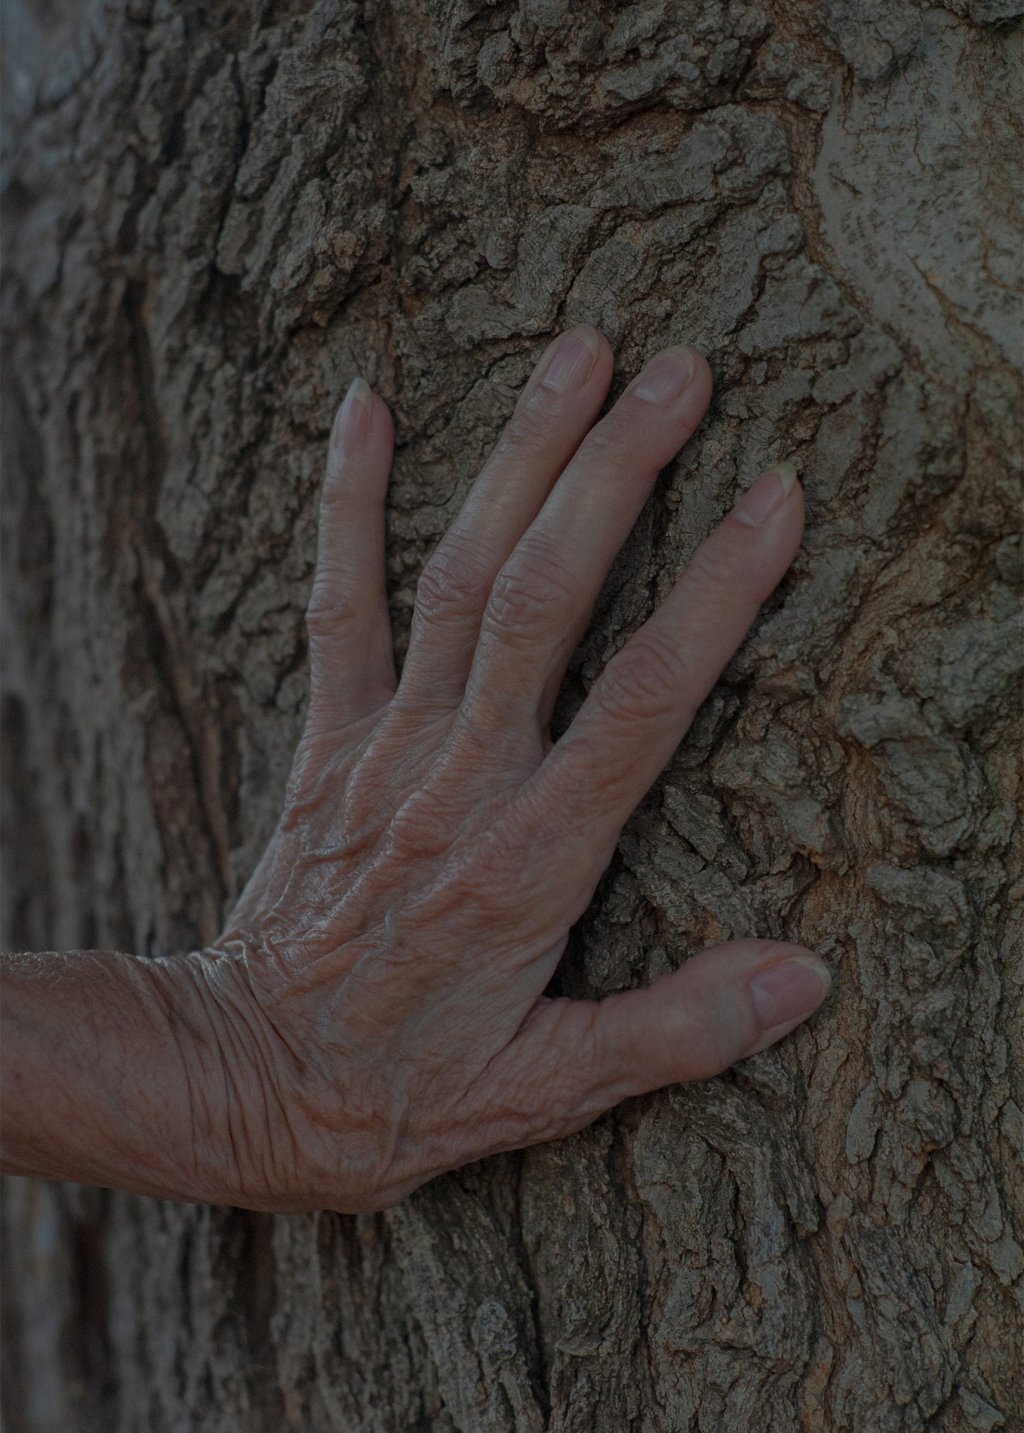 Jean Streety's worn hand rests against a tree in her front yard in Littlefield, Texas on June 25, 2022.